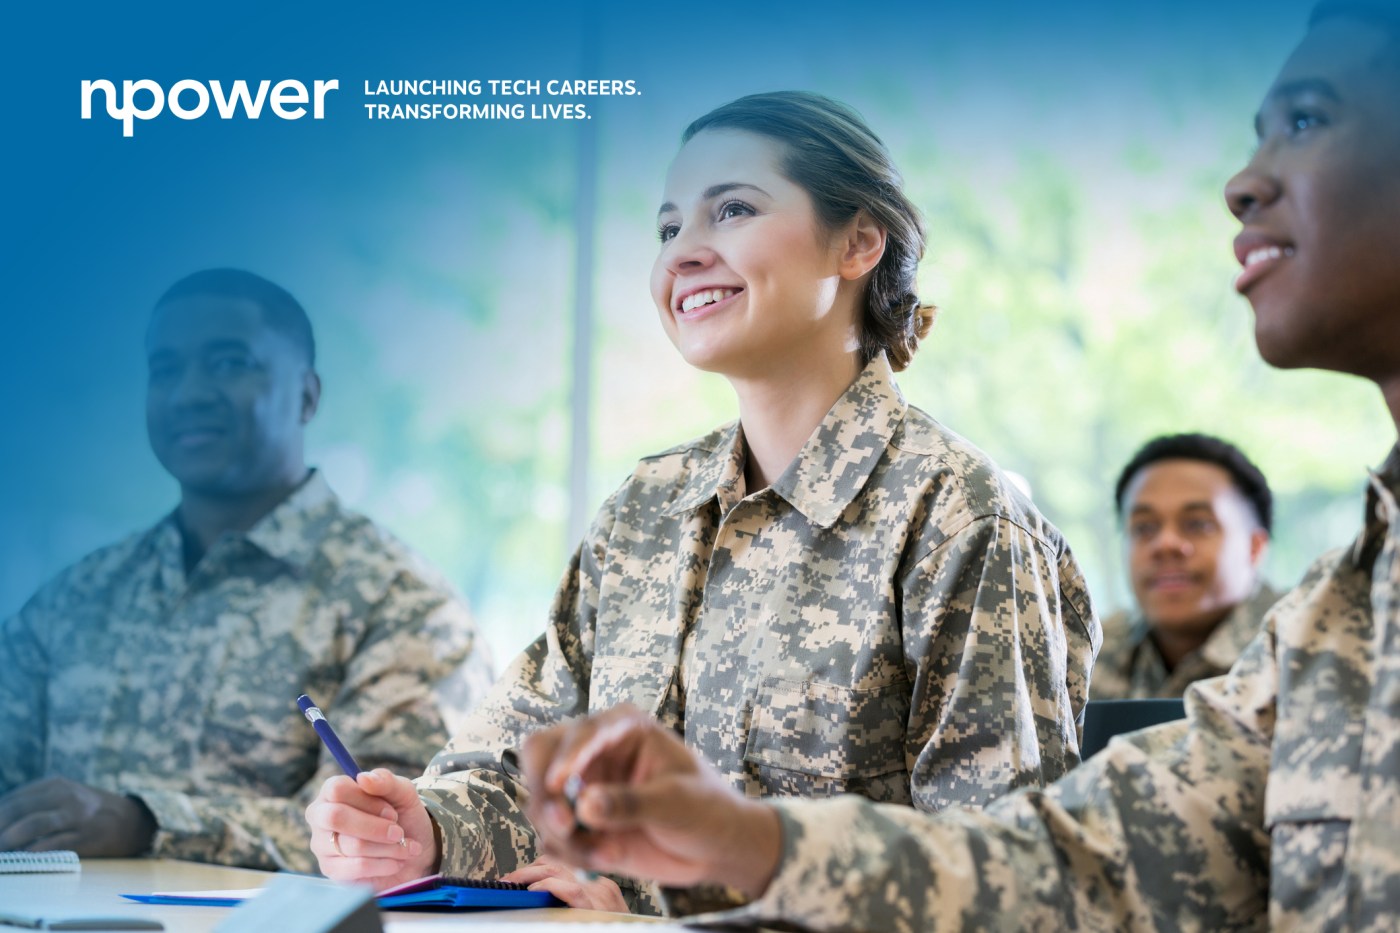 NPower is a nonprofit organization that trains Veterans to apply the skills they learned in the military to careers in technology.